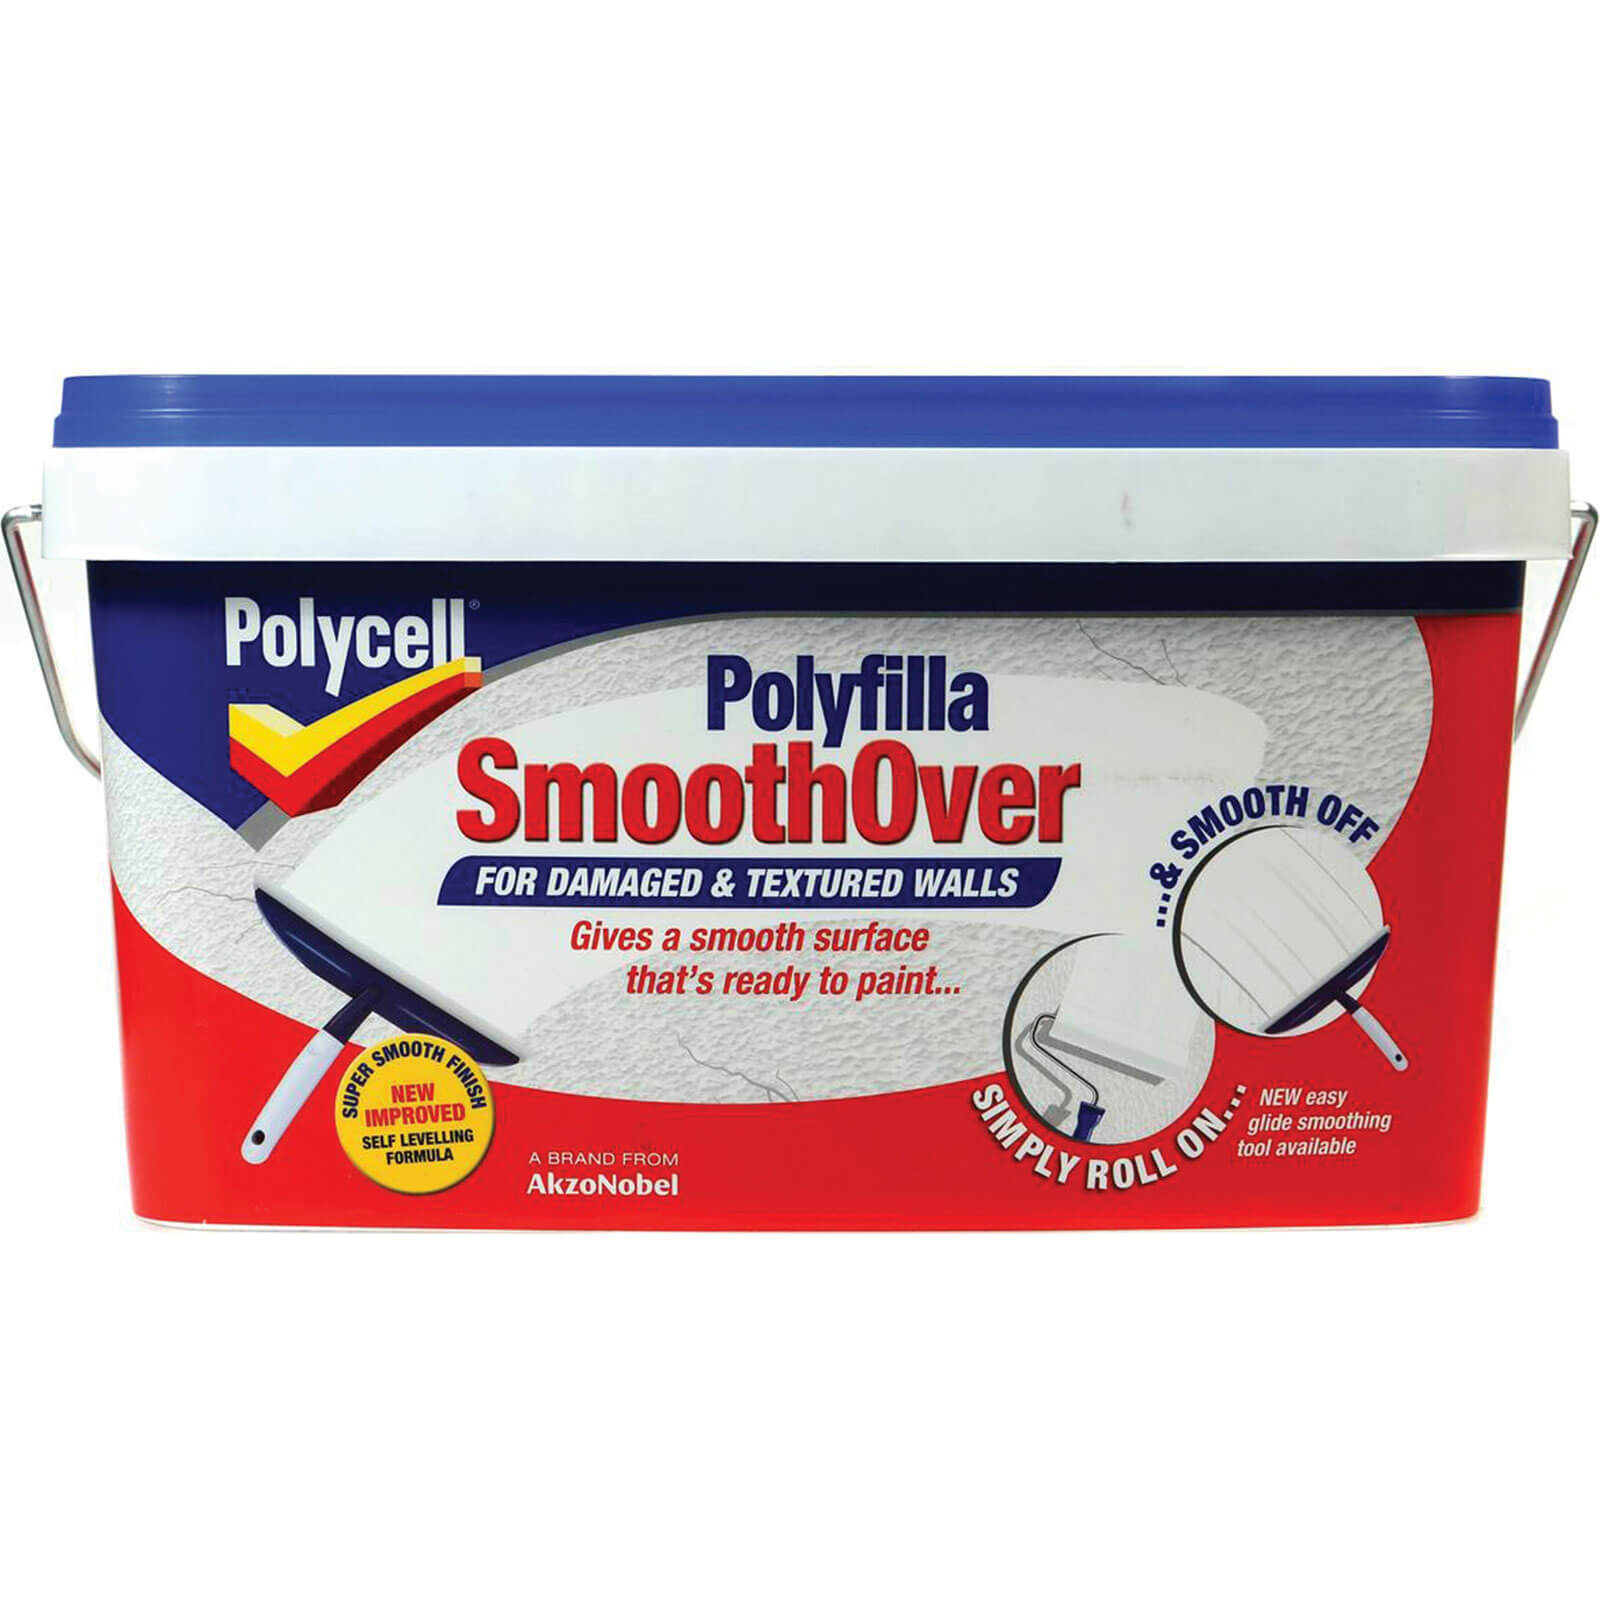 Image of Polycell Smooth Over for Damaged and Textured Walls 5l